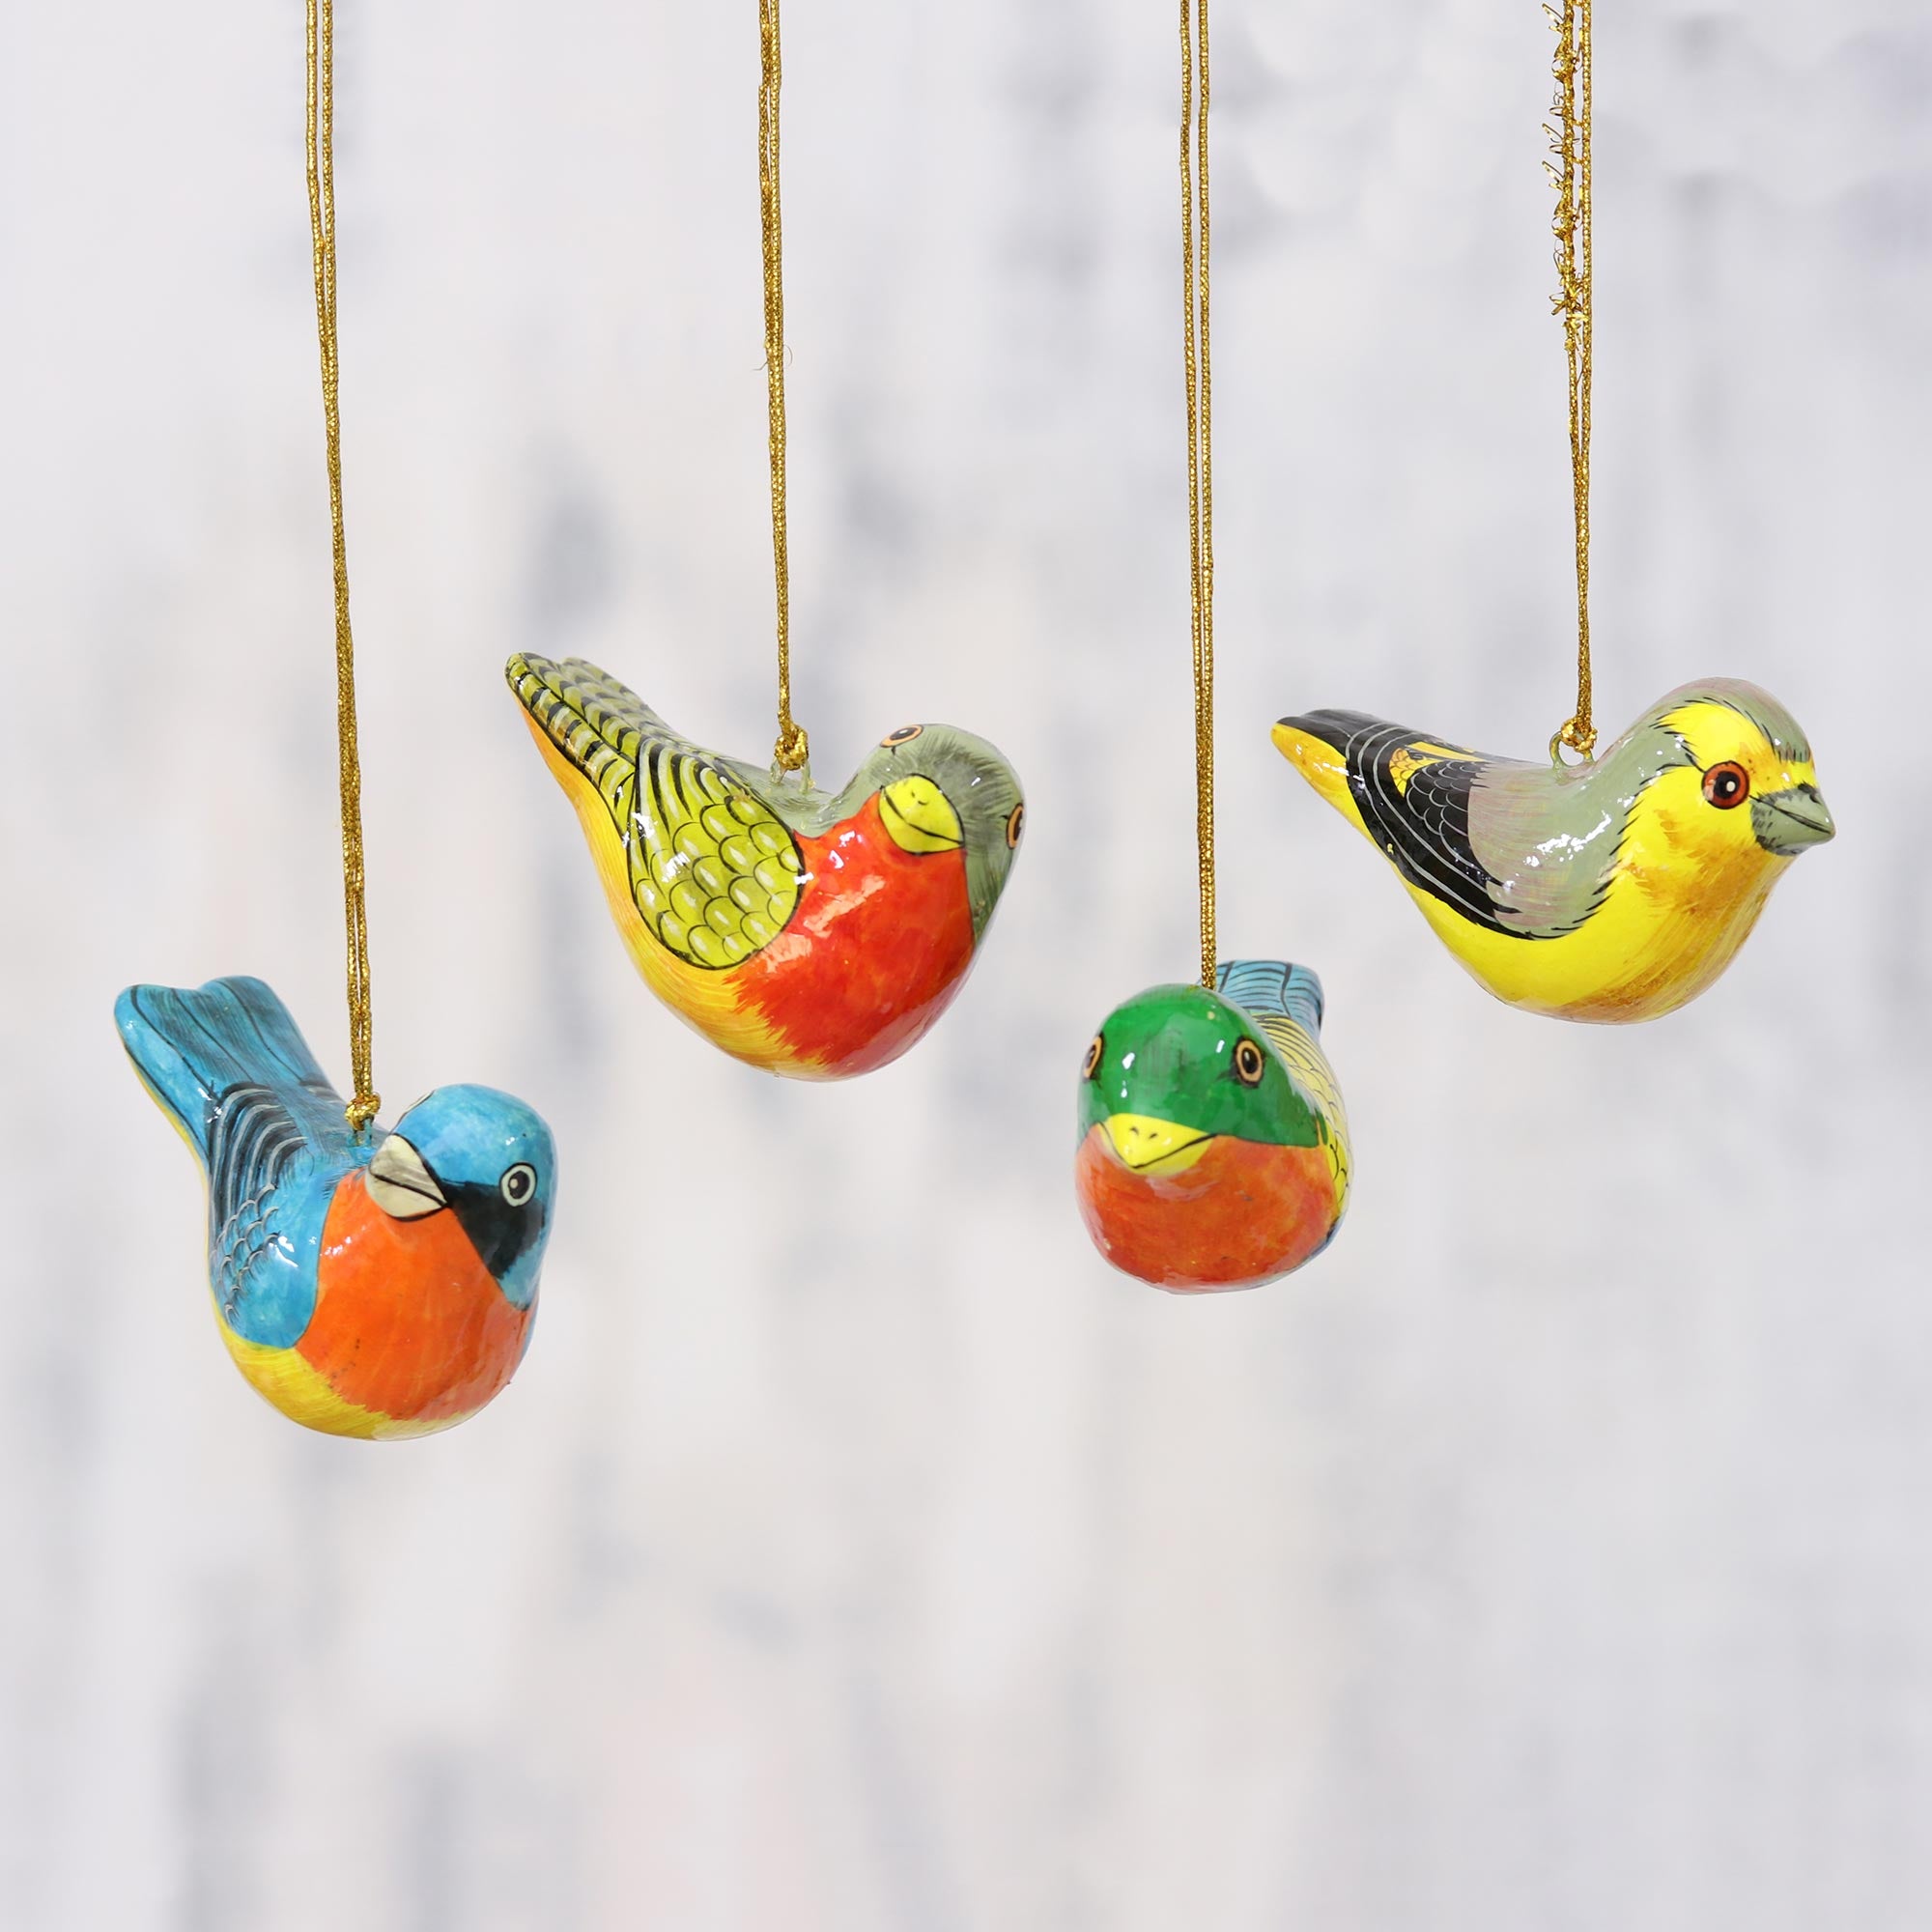 NOVICA Chirping Sparrows Four Colorful Papier Mache Bird Ornaments From India